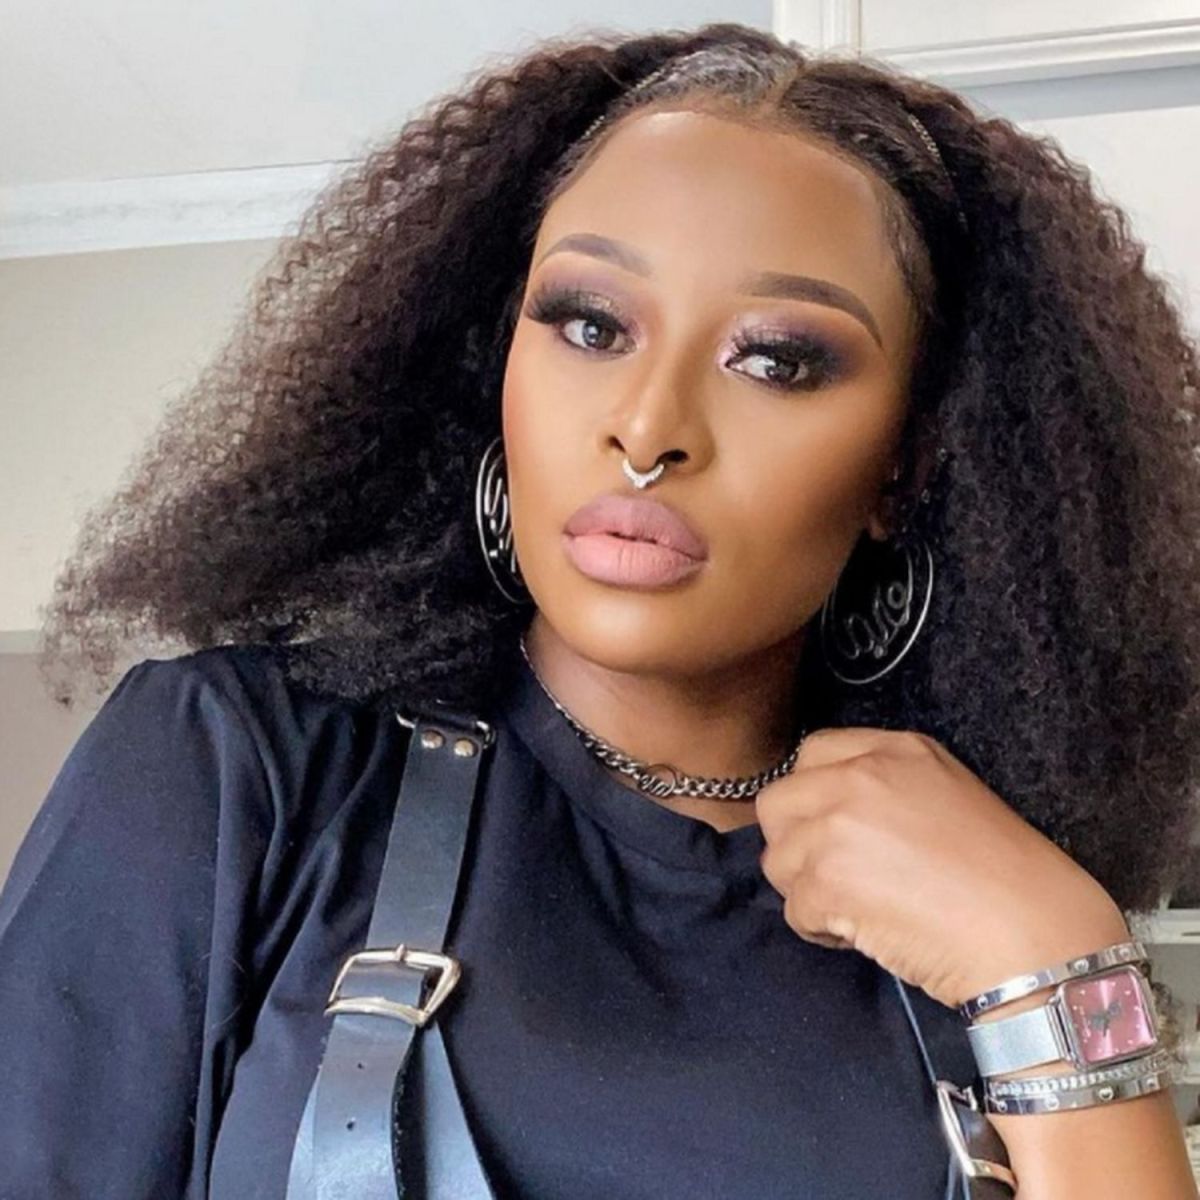 Dj Zinhle Reacts To Backlash Over Not Knowing How To Cook 7